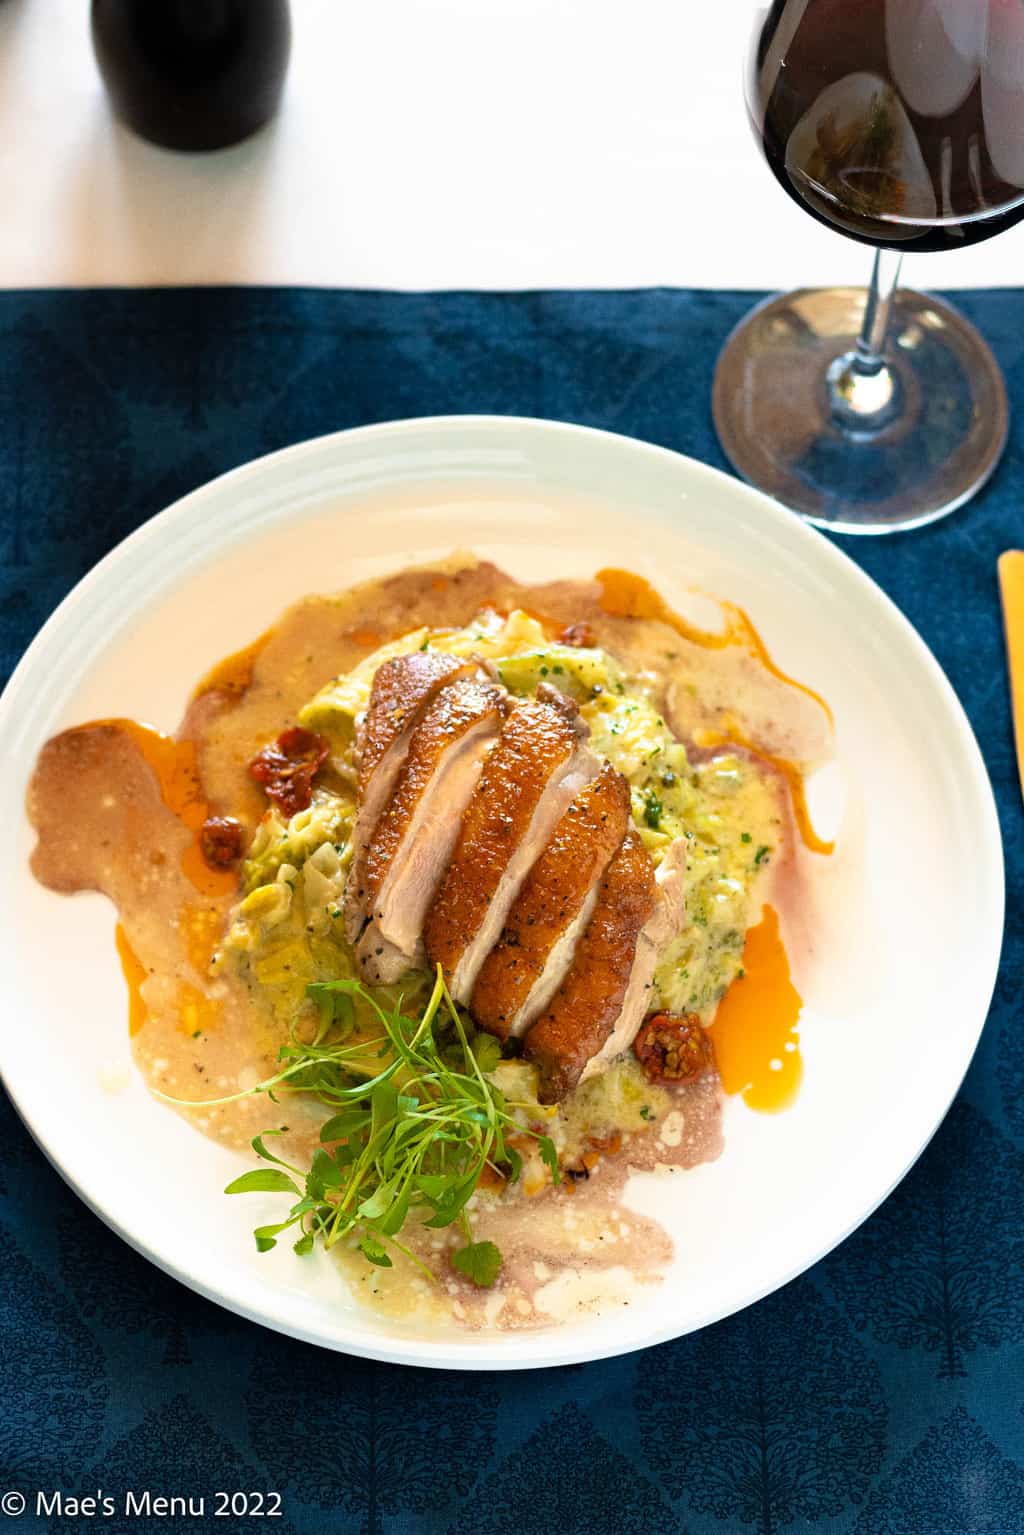 A plate of seared duck on creamed cabbage with pan sauces.